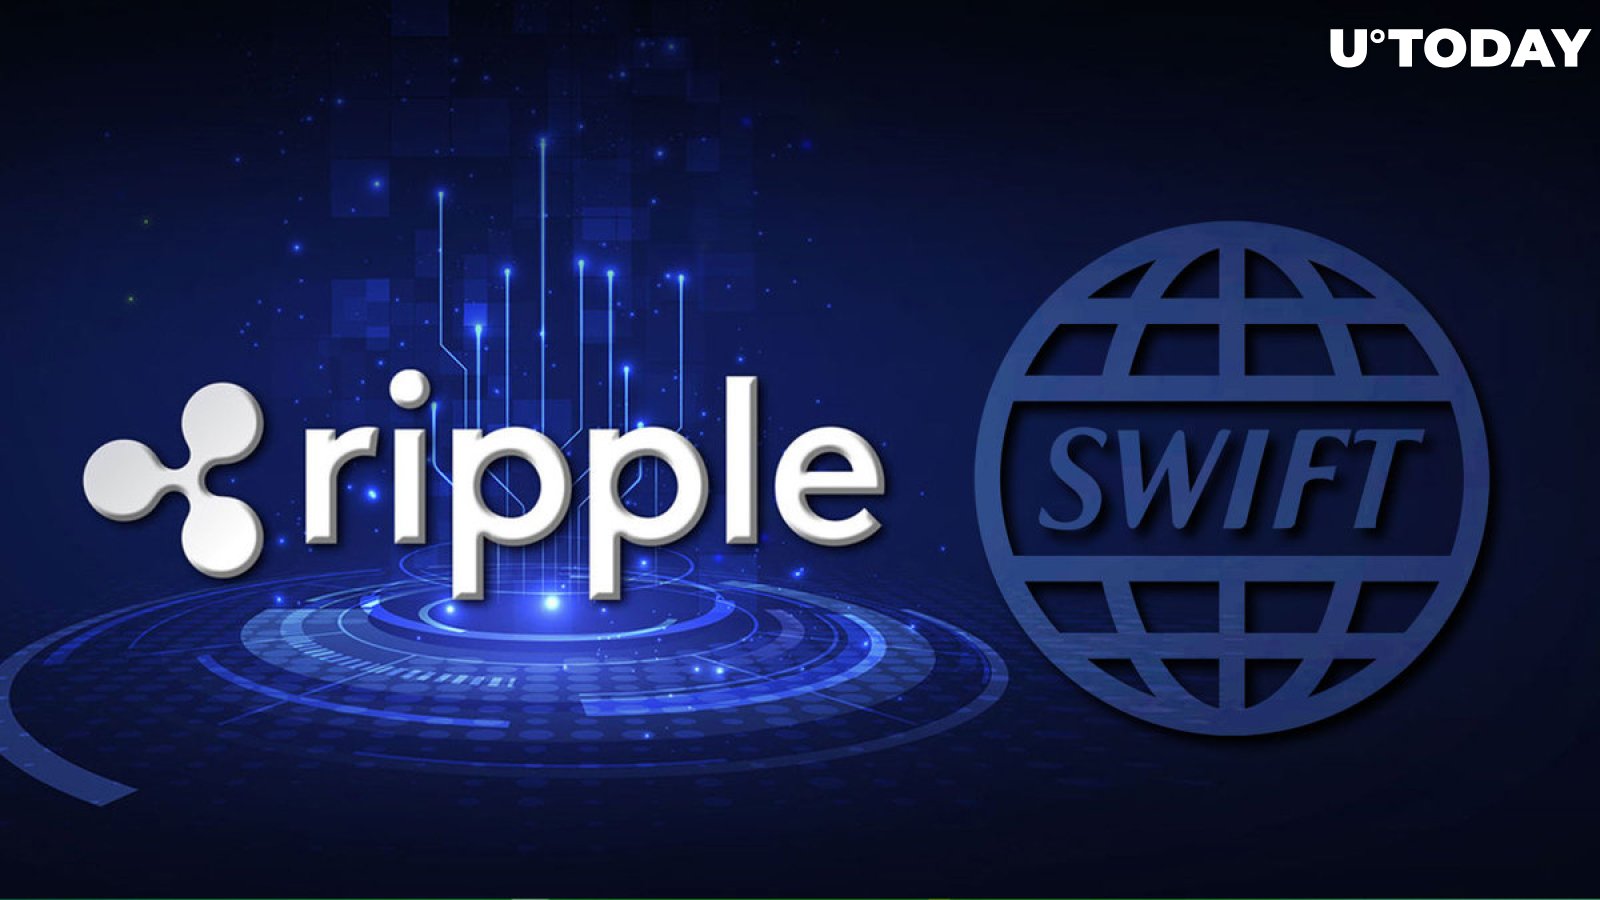 Is Ripple Ready? SWIFT's Latest Innovation Targets 500 Banks in 120 Countries